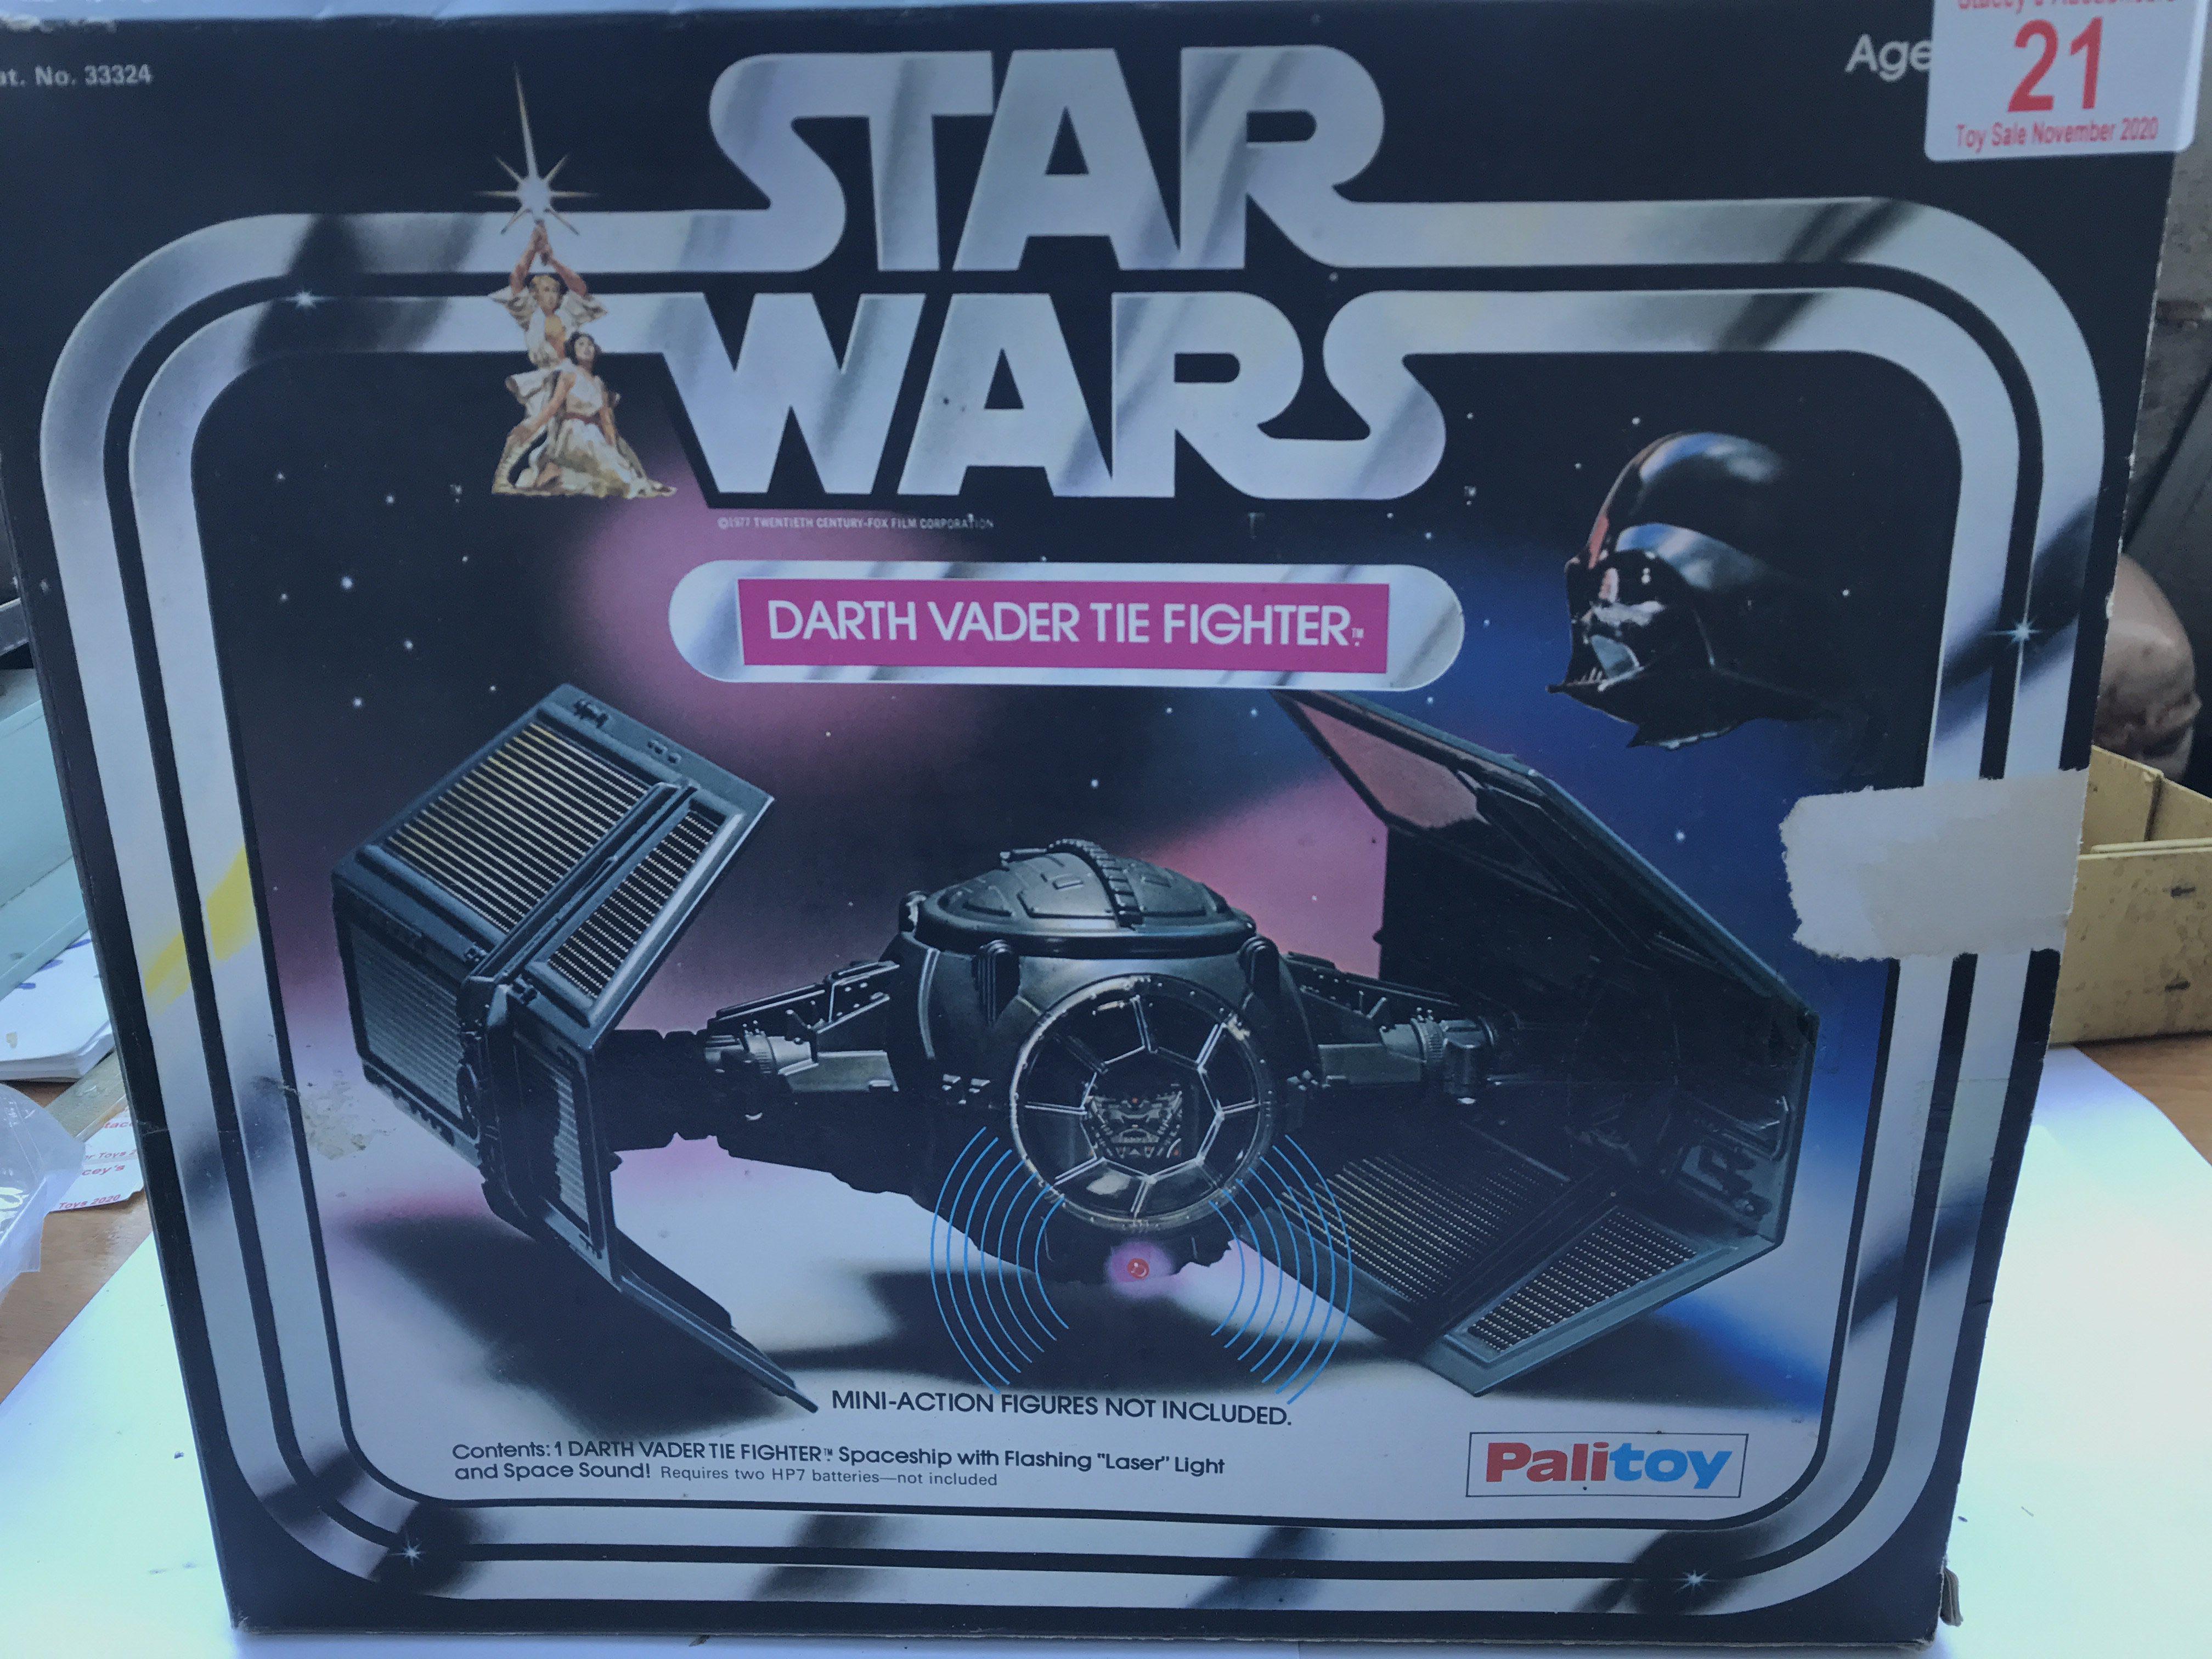 A Palitoy boxed Darth Vader Tie Fighter.